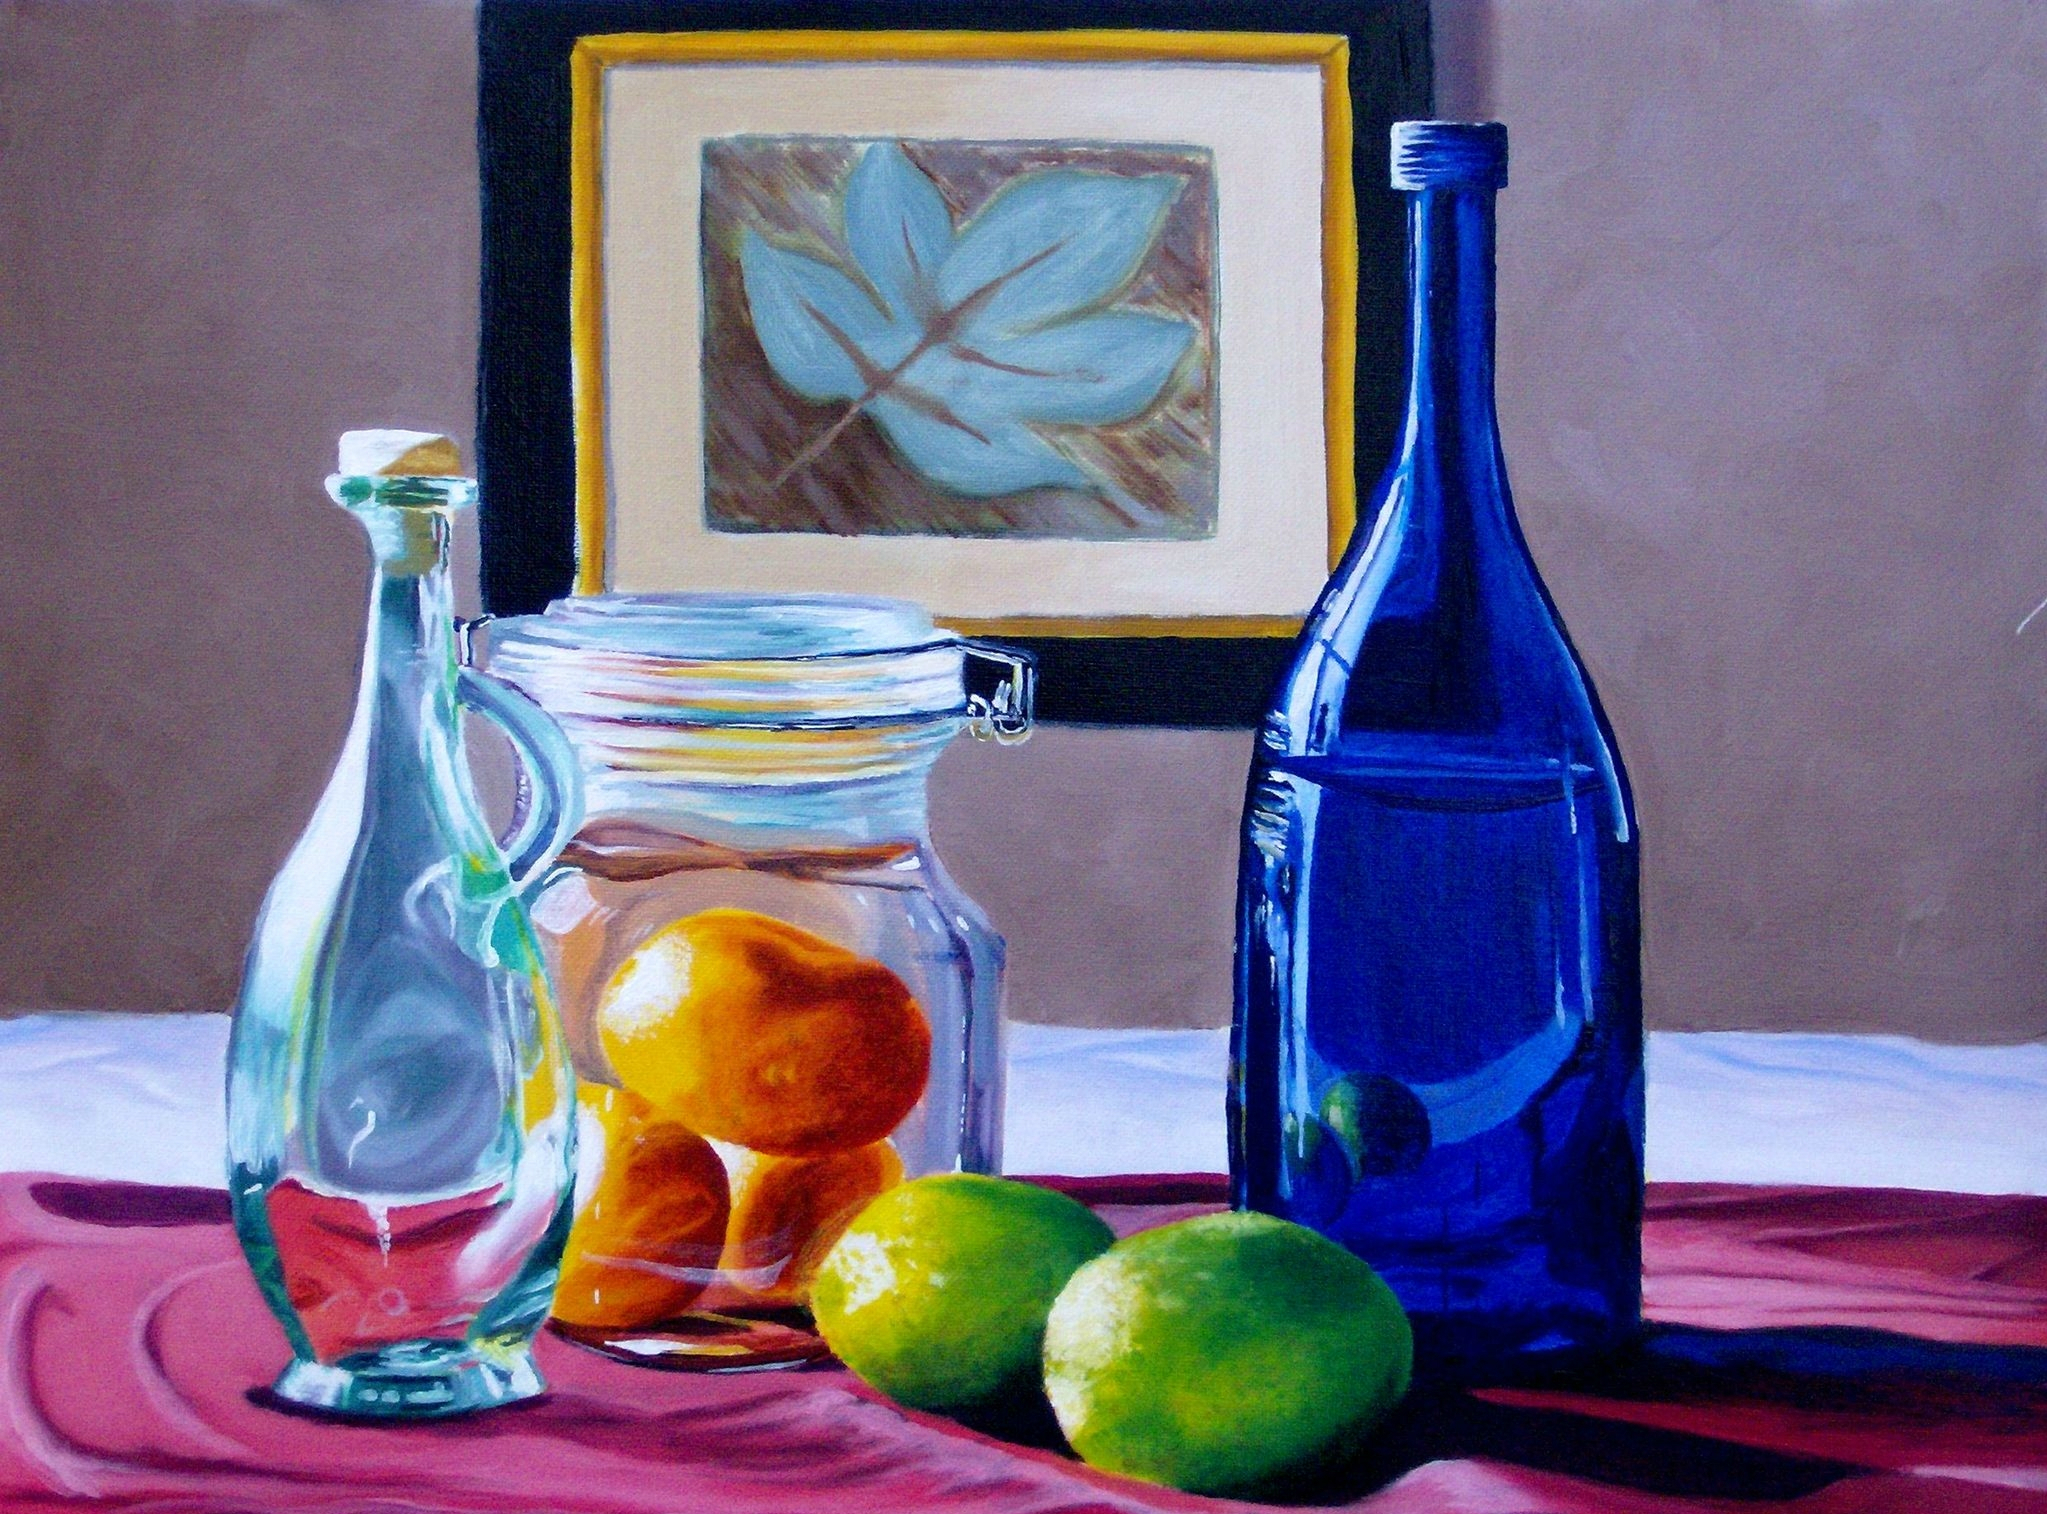 Vibrant still life artwork with artistic composition